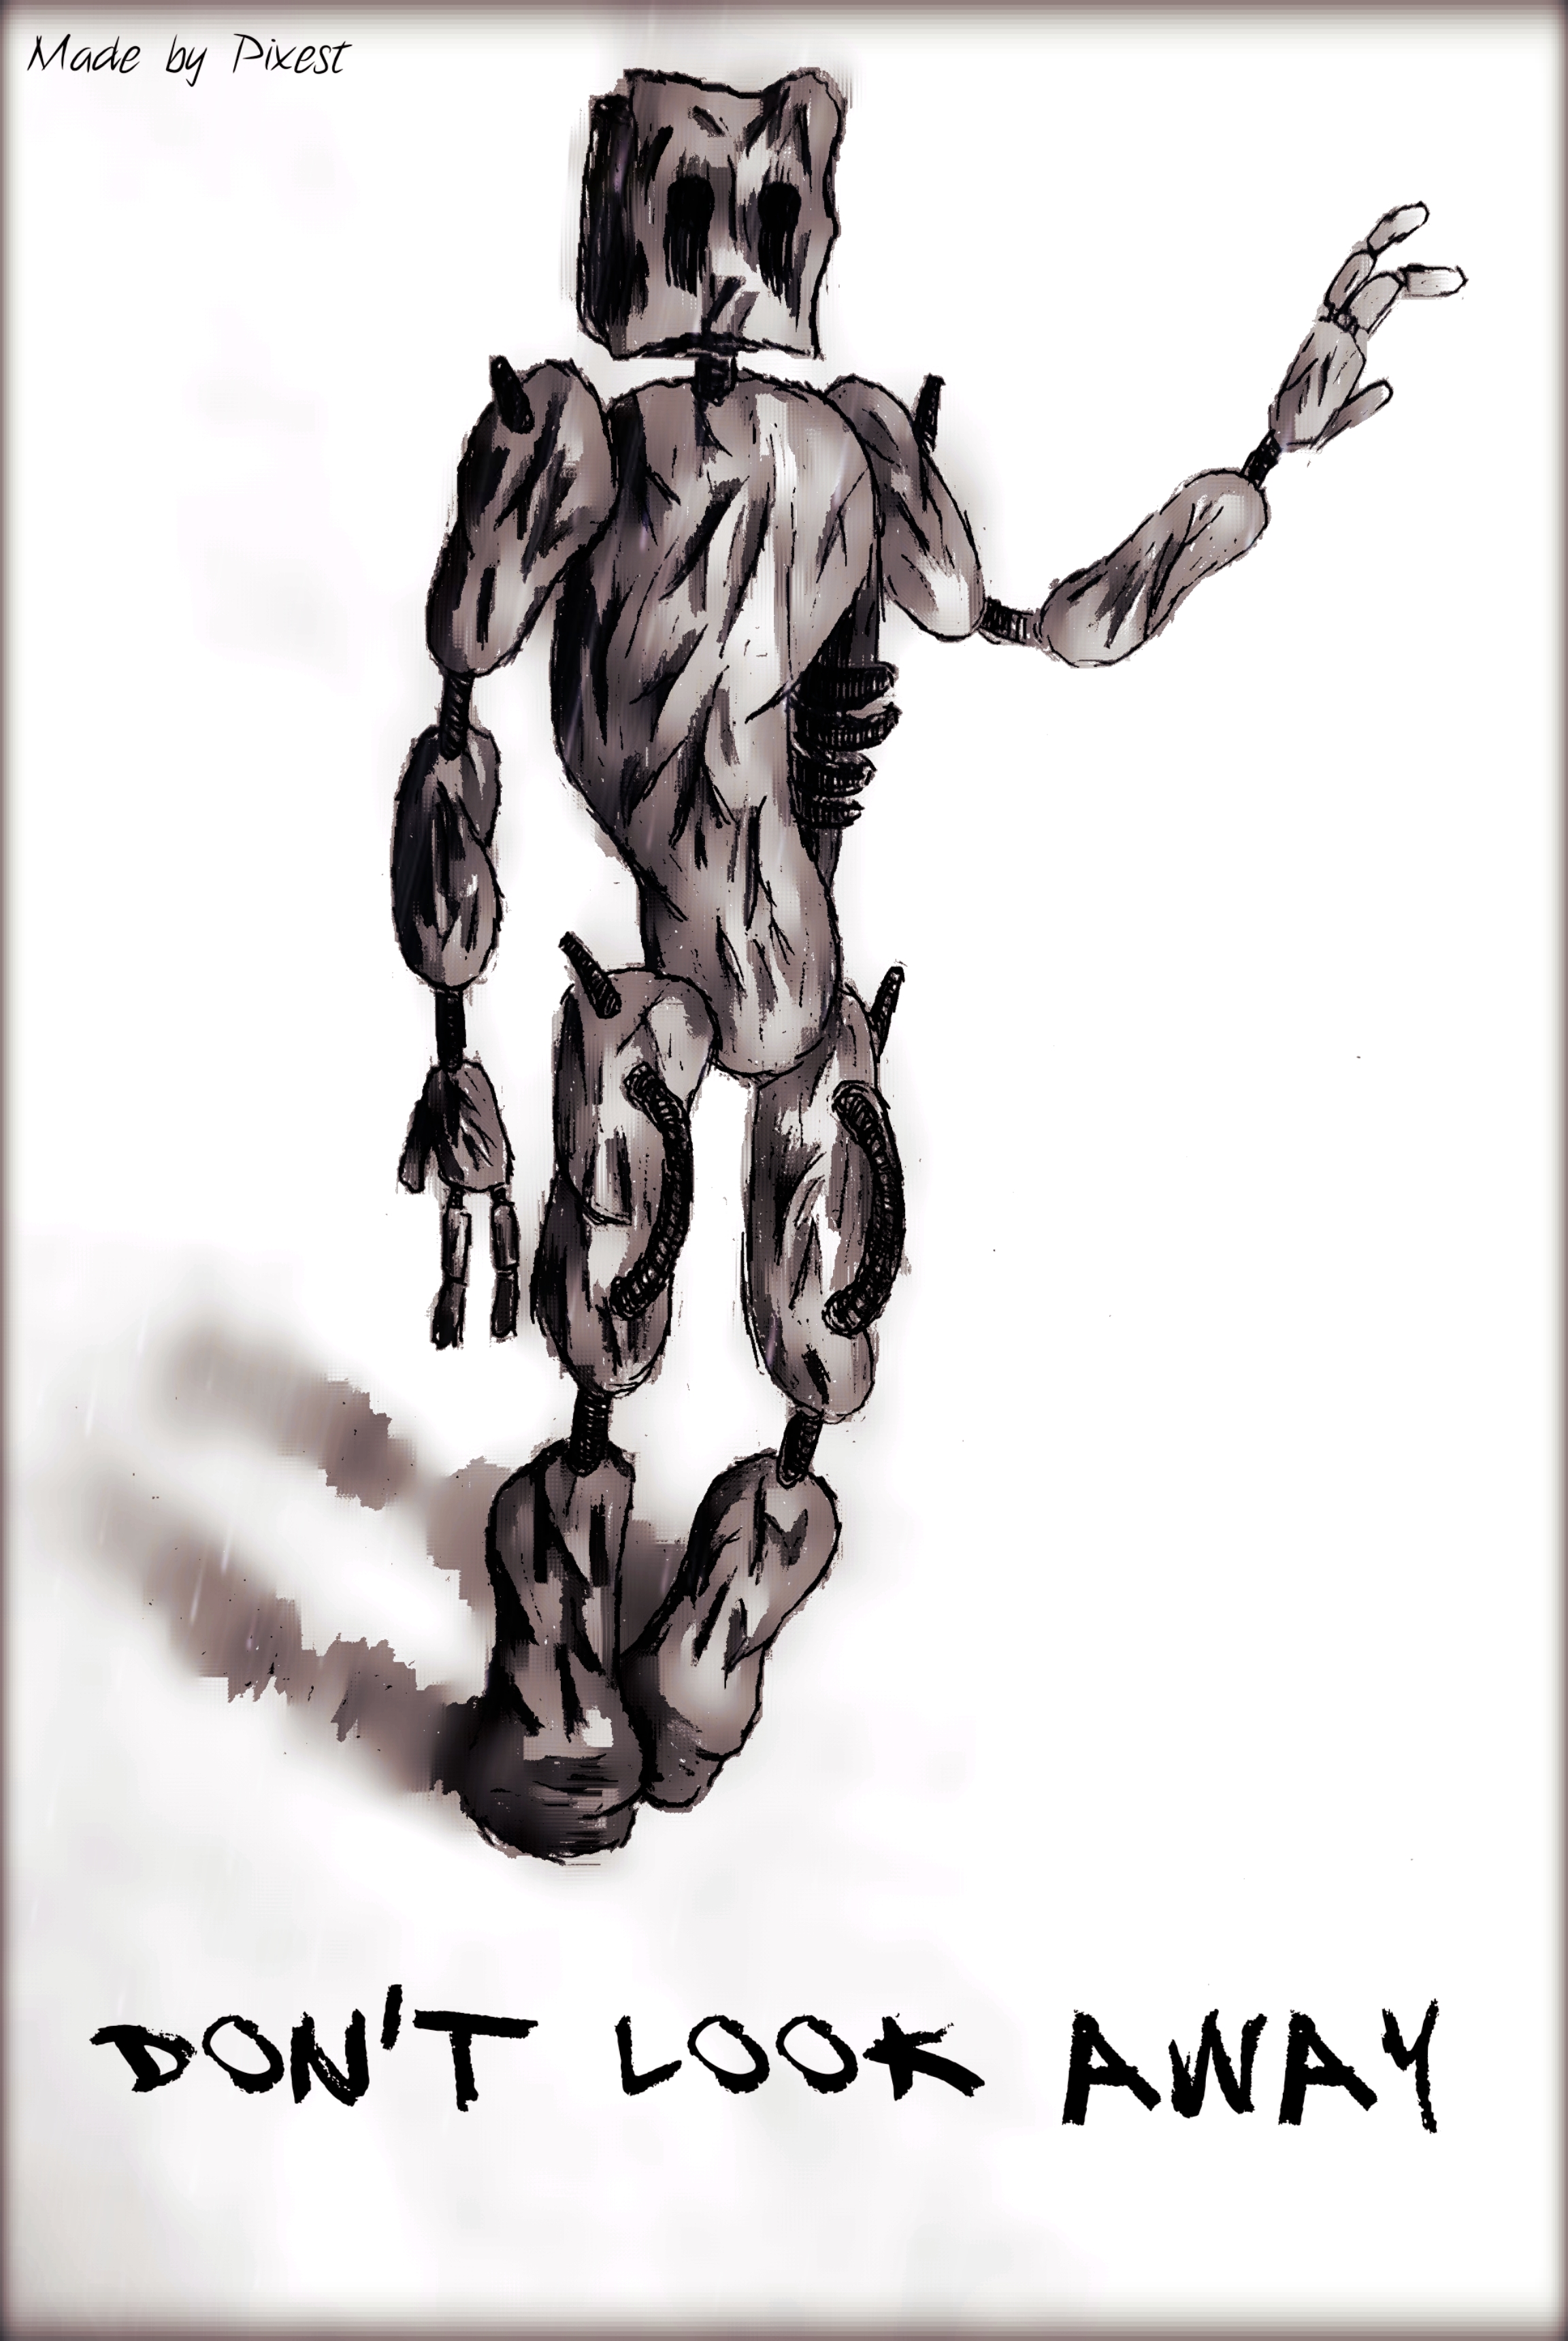 scp-173-fragmented-minds-redesign-by-pizzest-on-deviantart